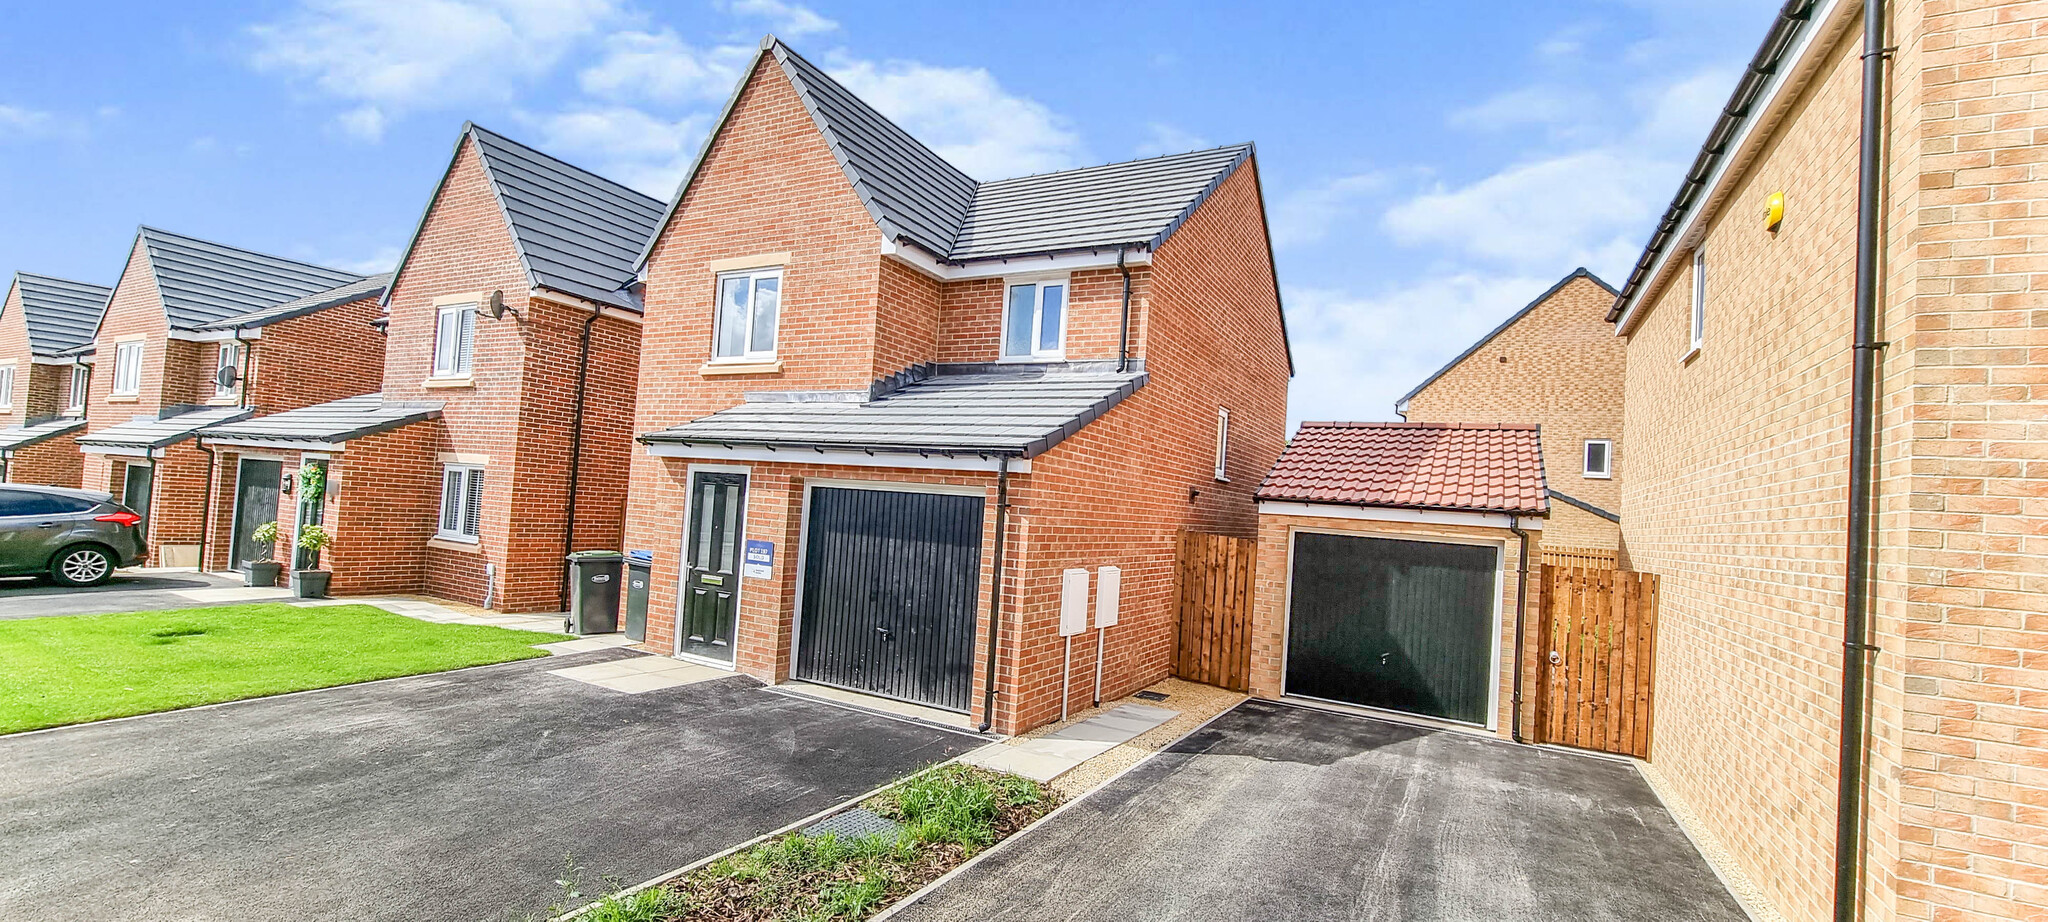 3 bed Detached for rent in Newton Aycliffe. From Aycliffe Homes - Newton Aycliffe